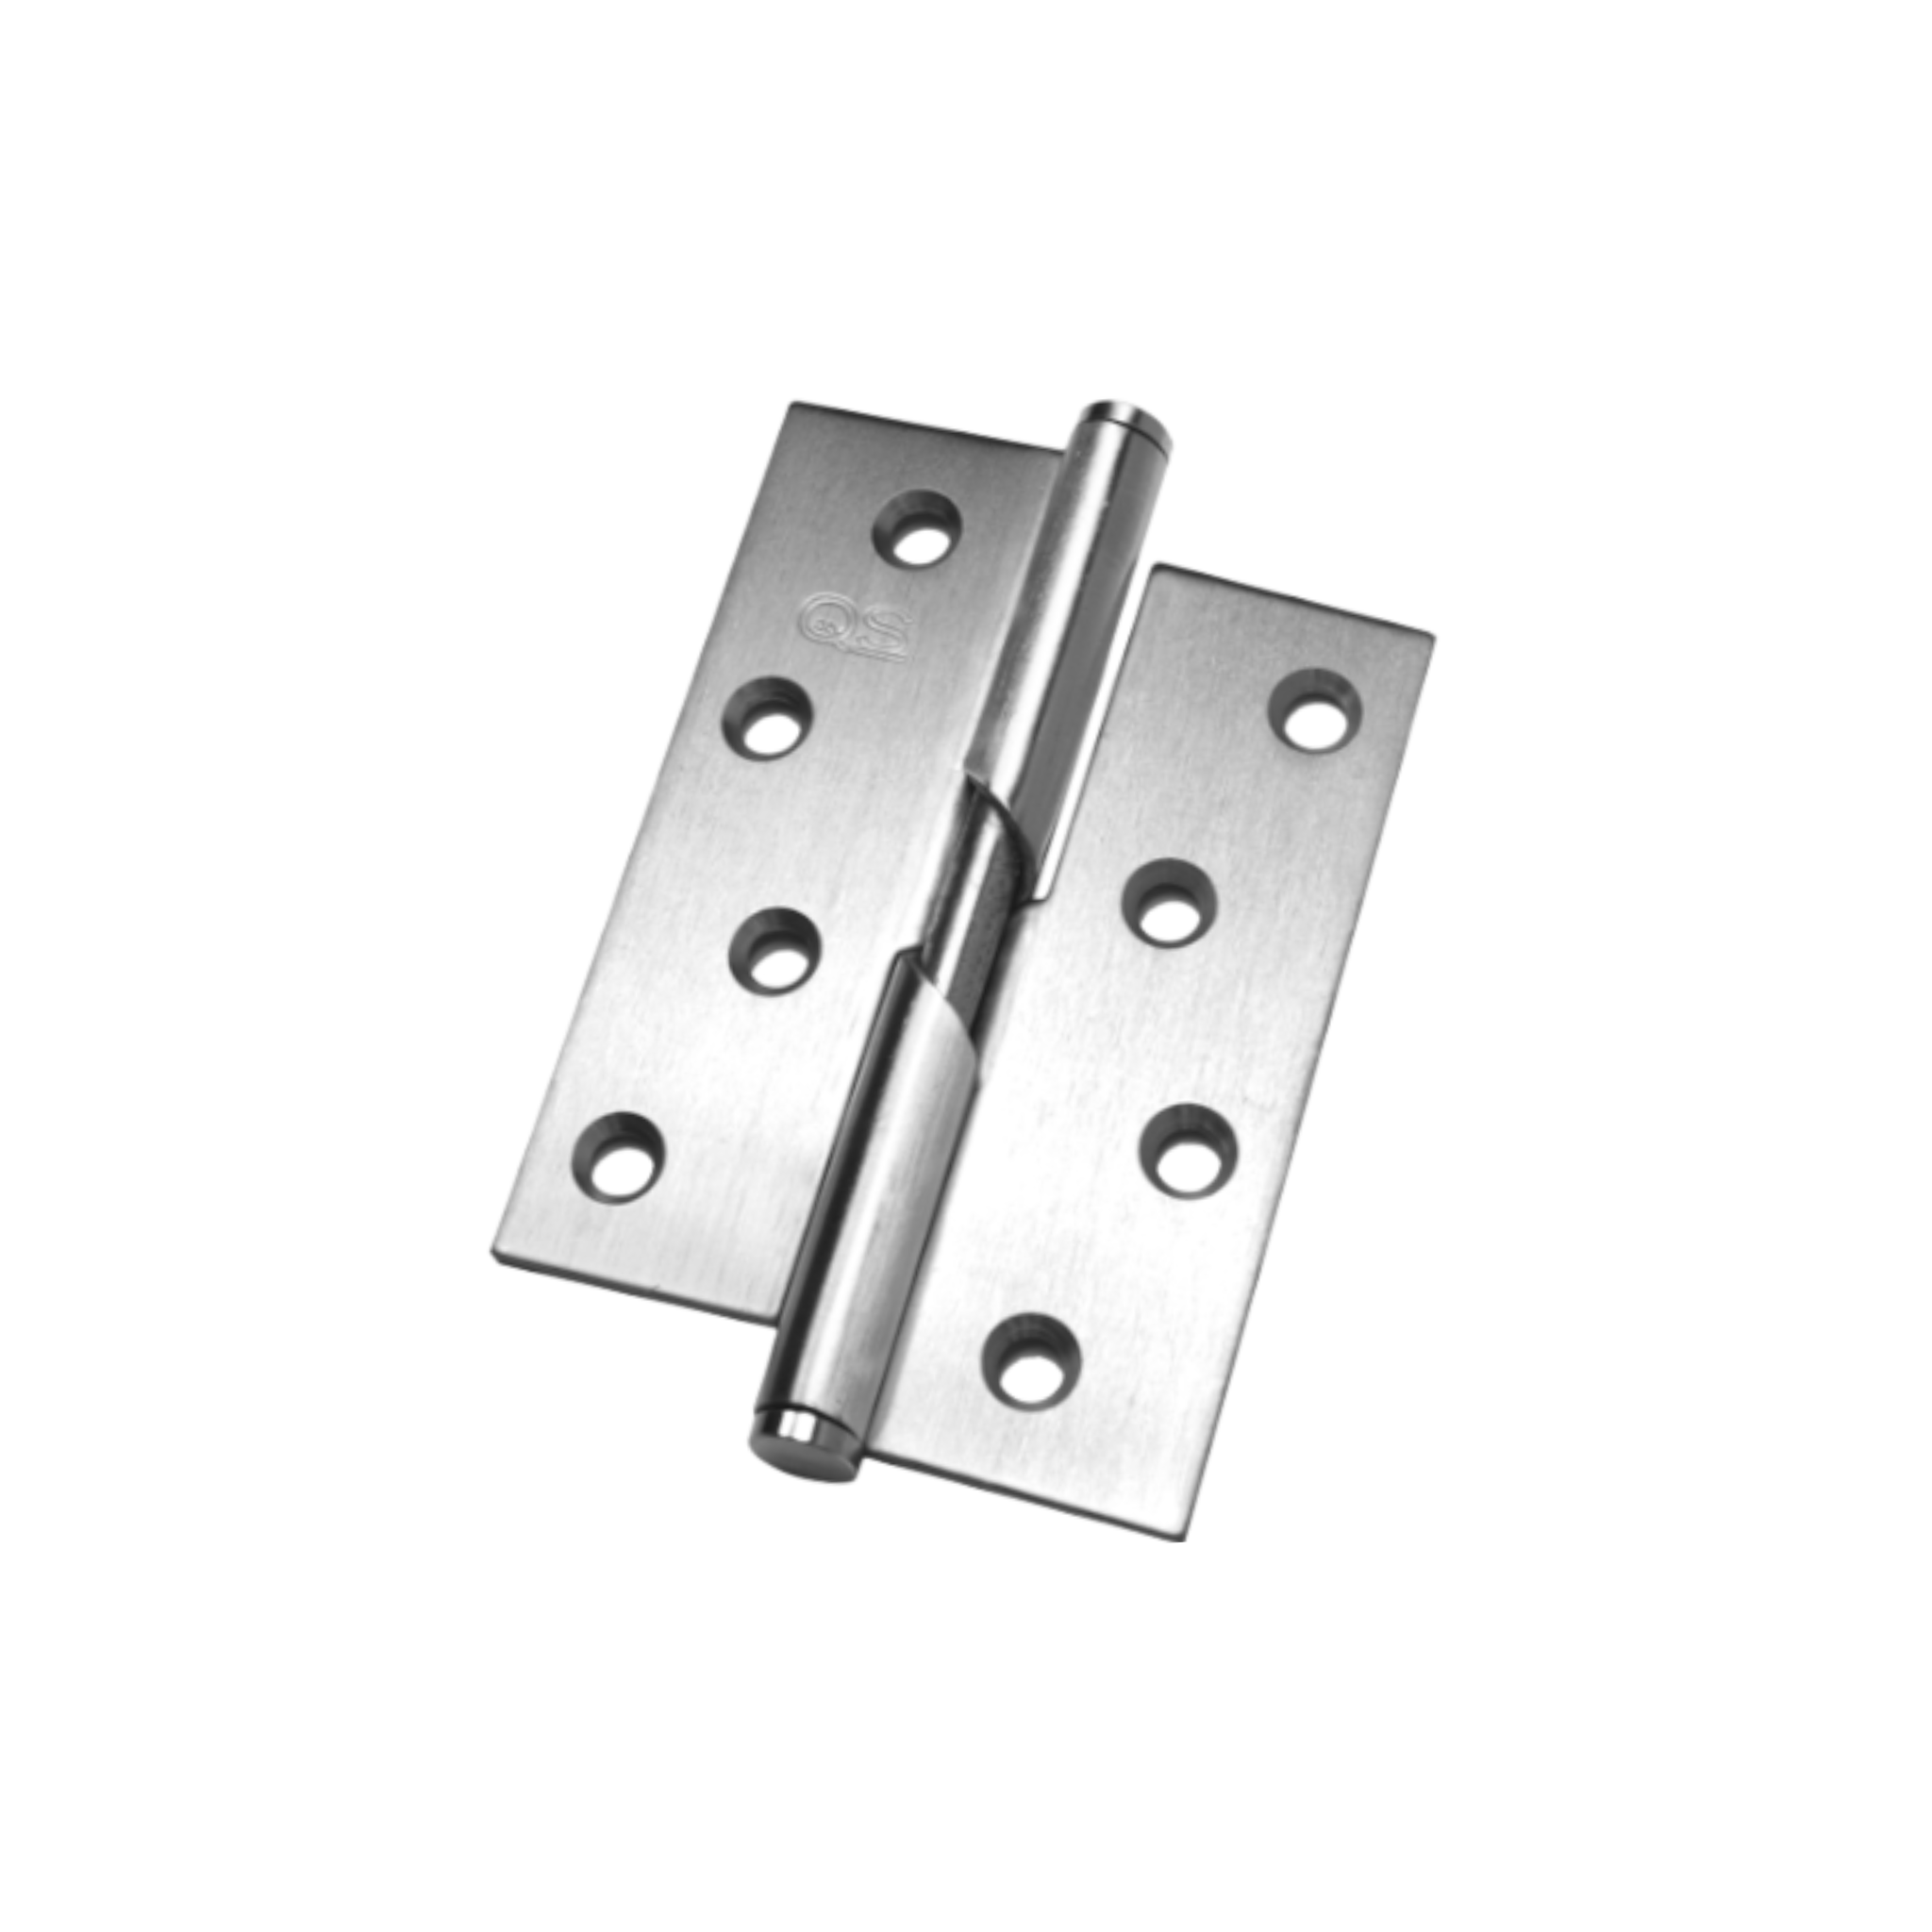 QS4440 RH, Rising Hinge, Right Hand, 2 x Hinges (1 Pair), 100mm (h) x 76mm (w) x 2mm (t), Stainless Steel, QS